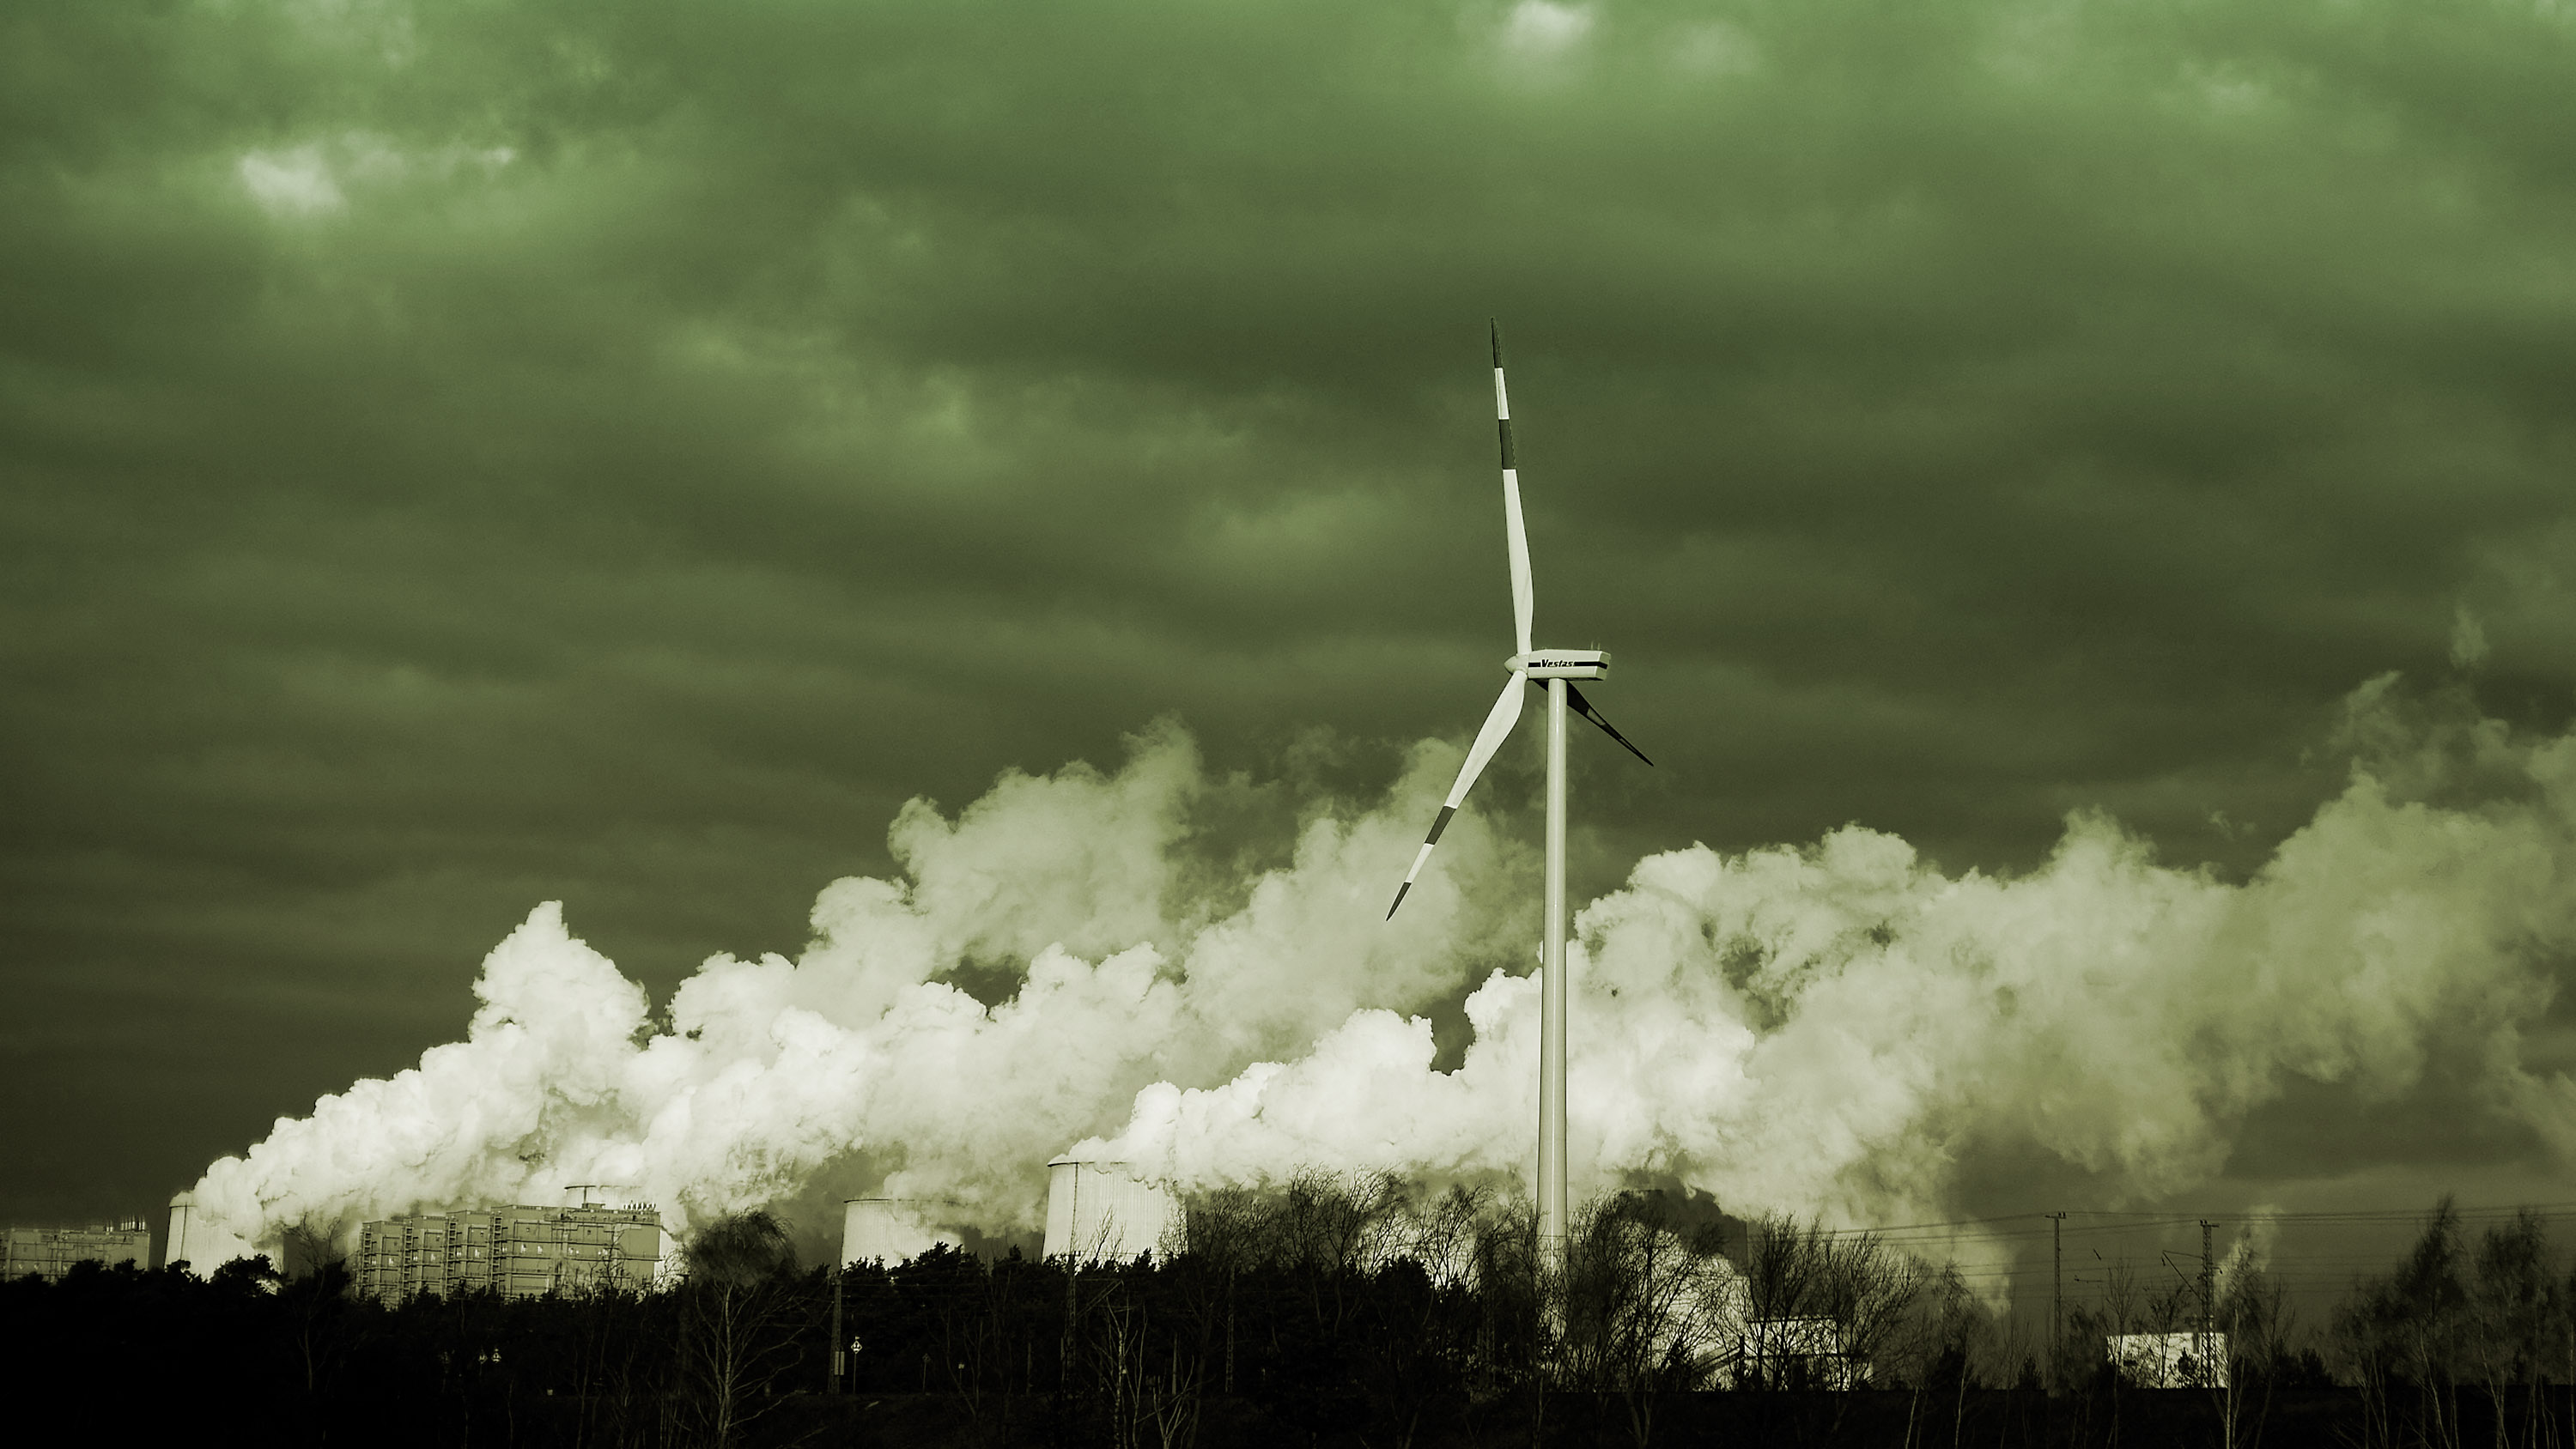 a single wind turbine spins next to the exhaust of an industrial coal plant